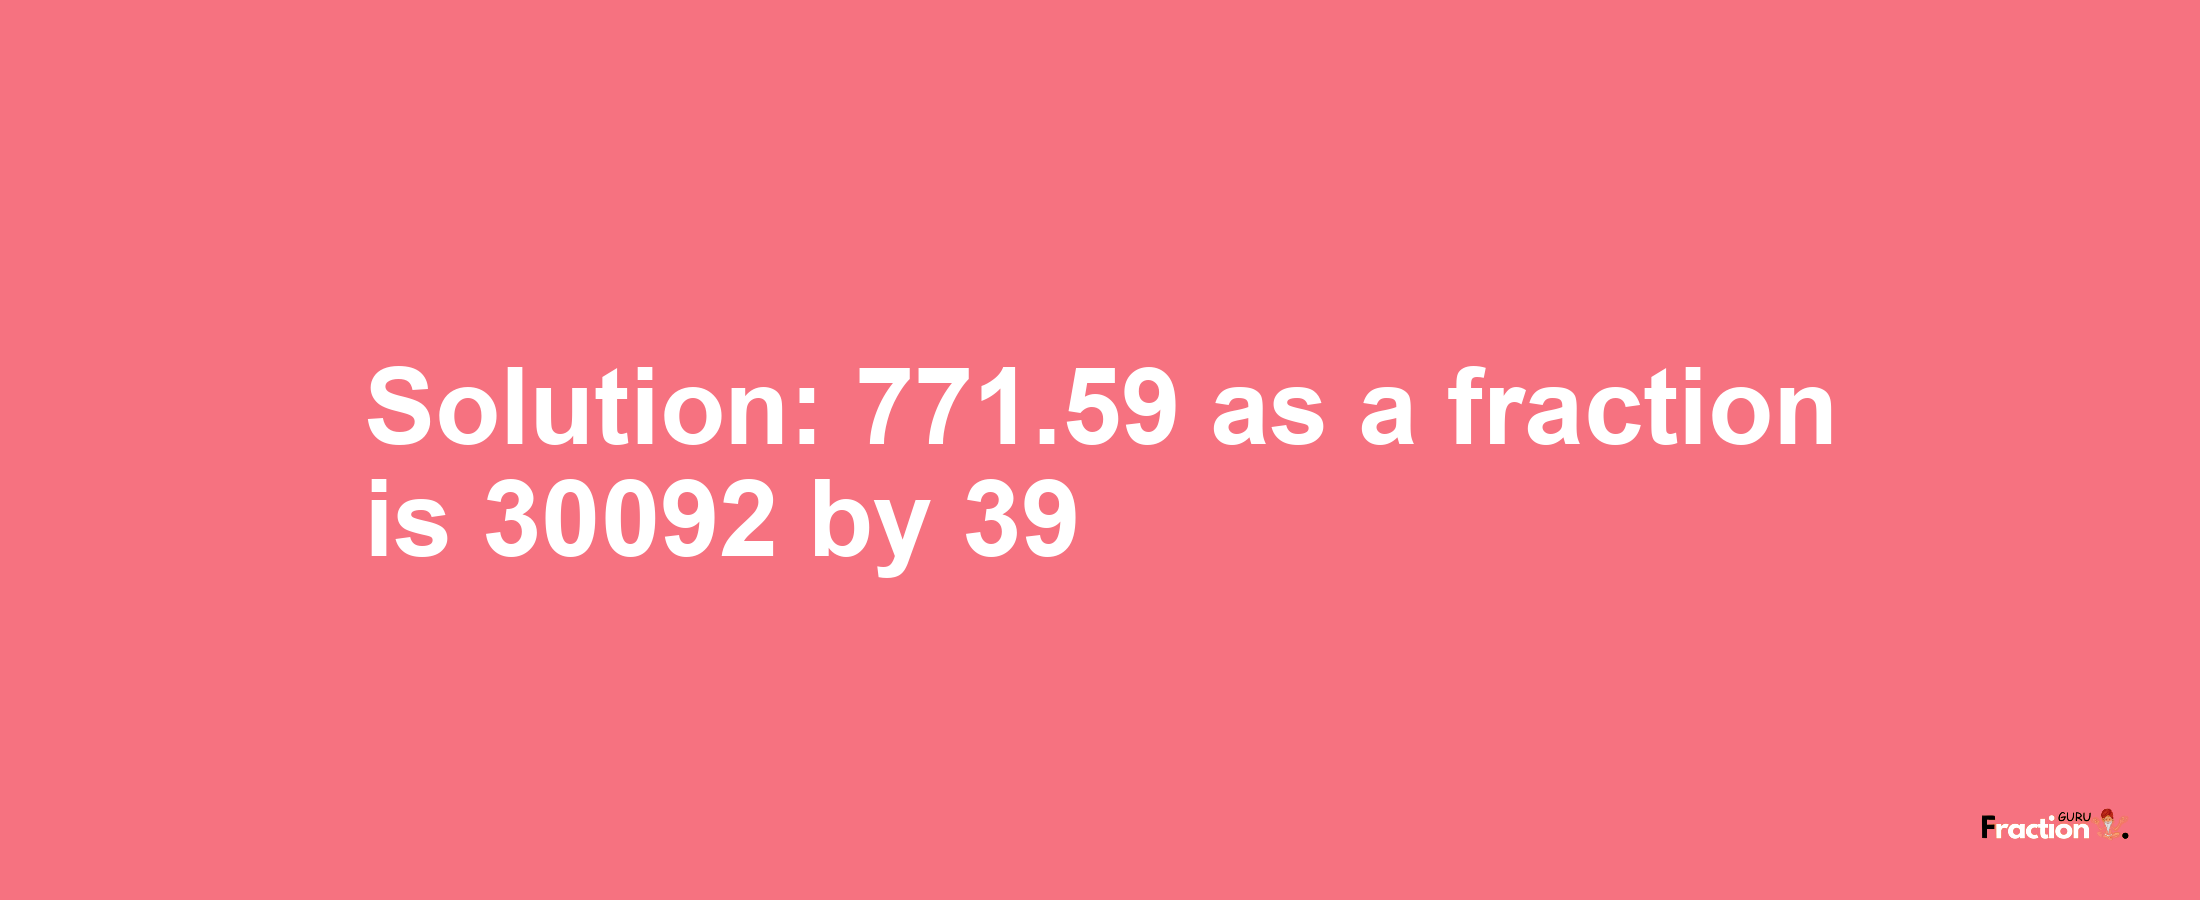 Solution:771.59 as a fraction is 30092/39